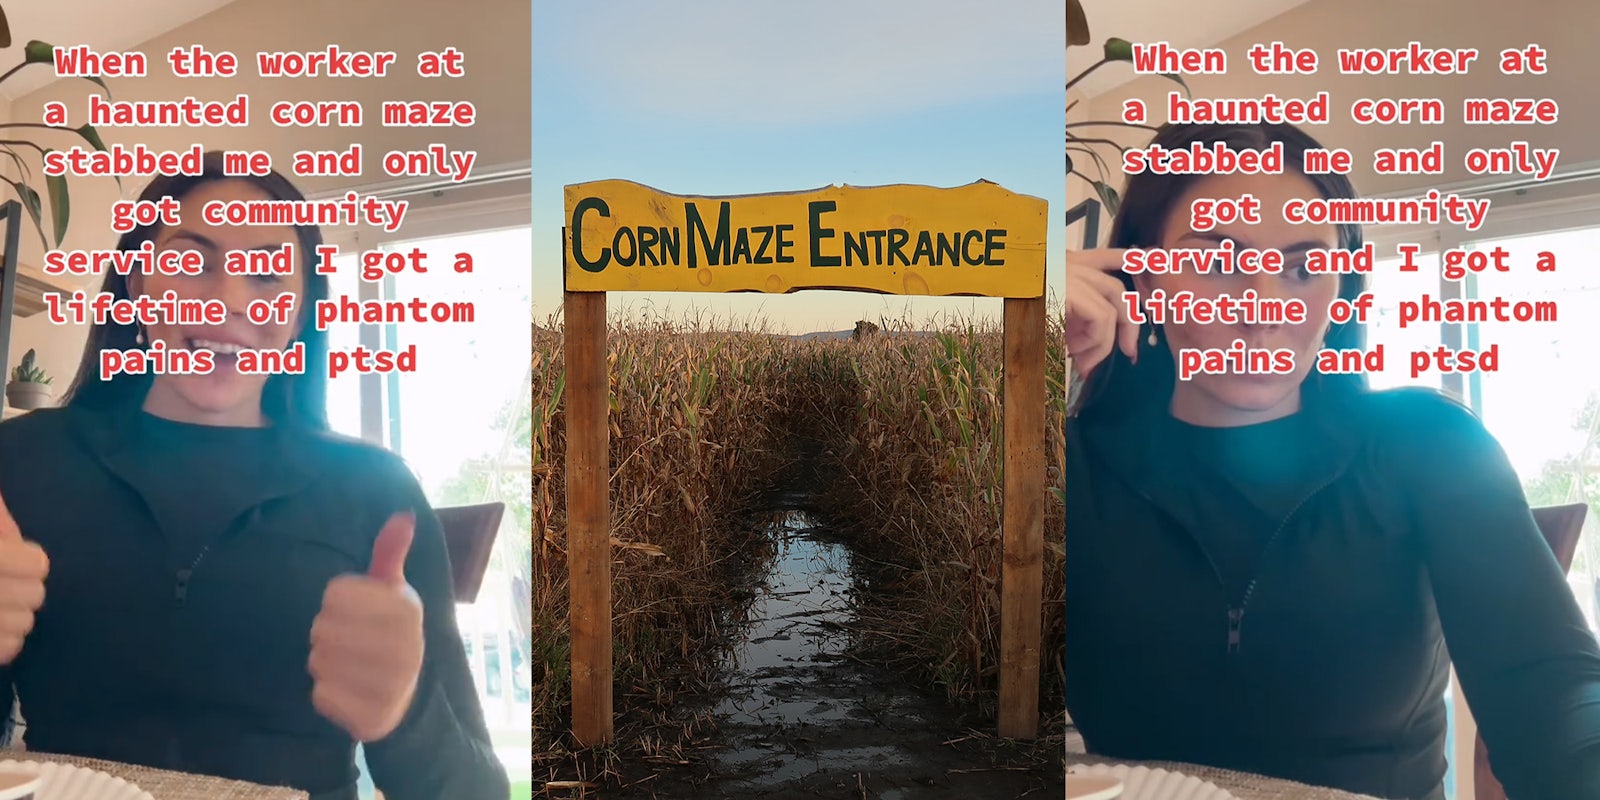 Woman says she was hurt by worker at a haunted corn maze